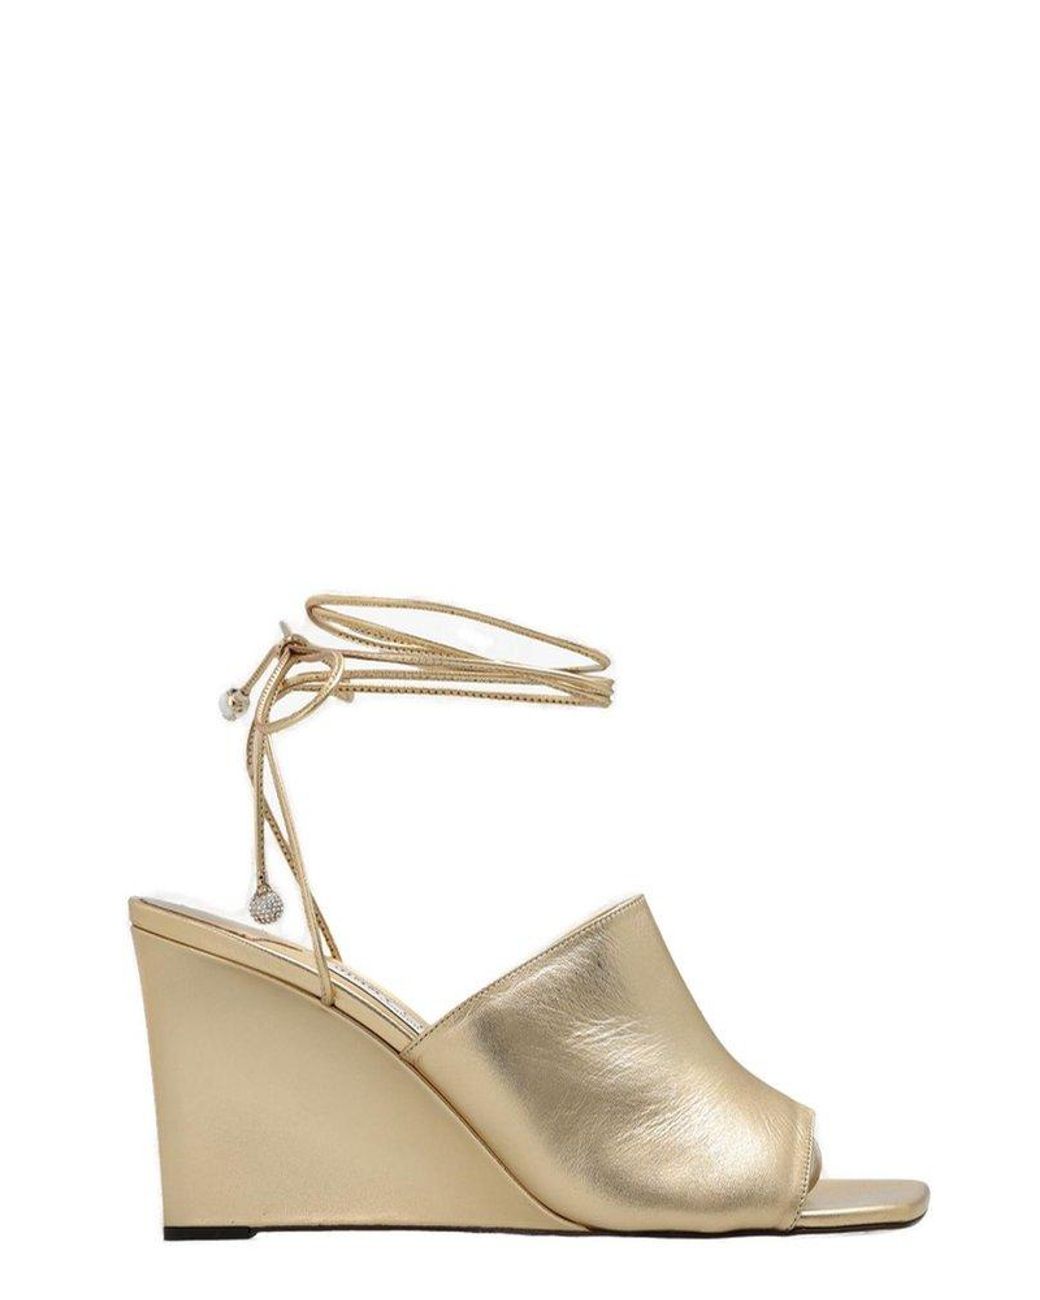 Jimmy Choo Elyna Wedge Sandals in Natural | Lyst